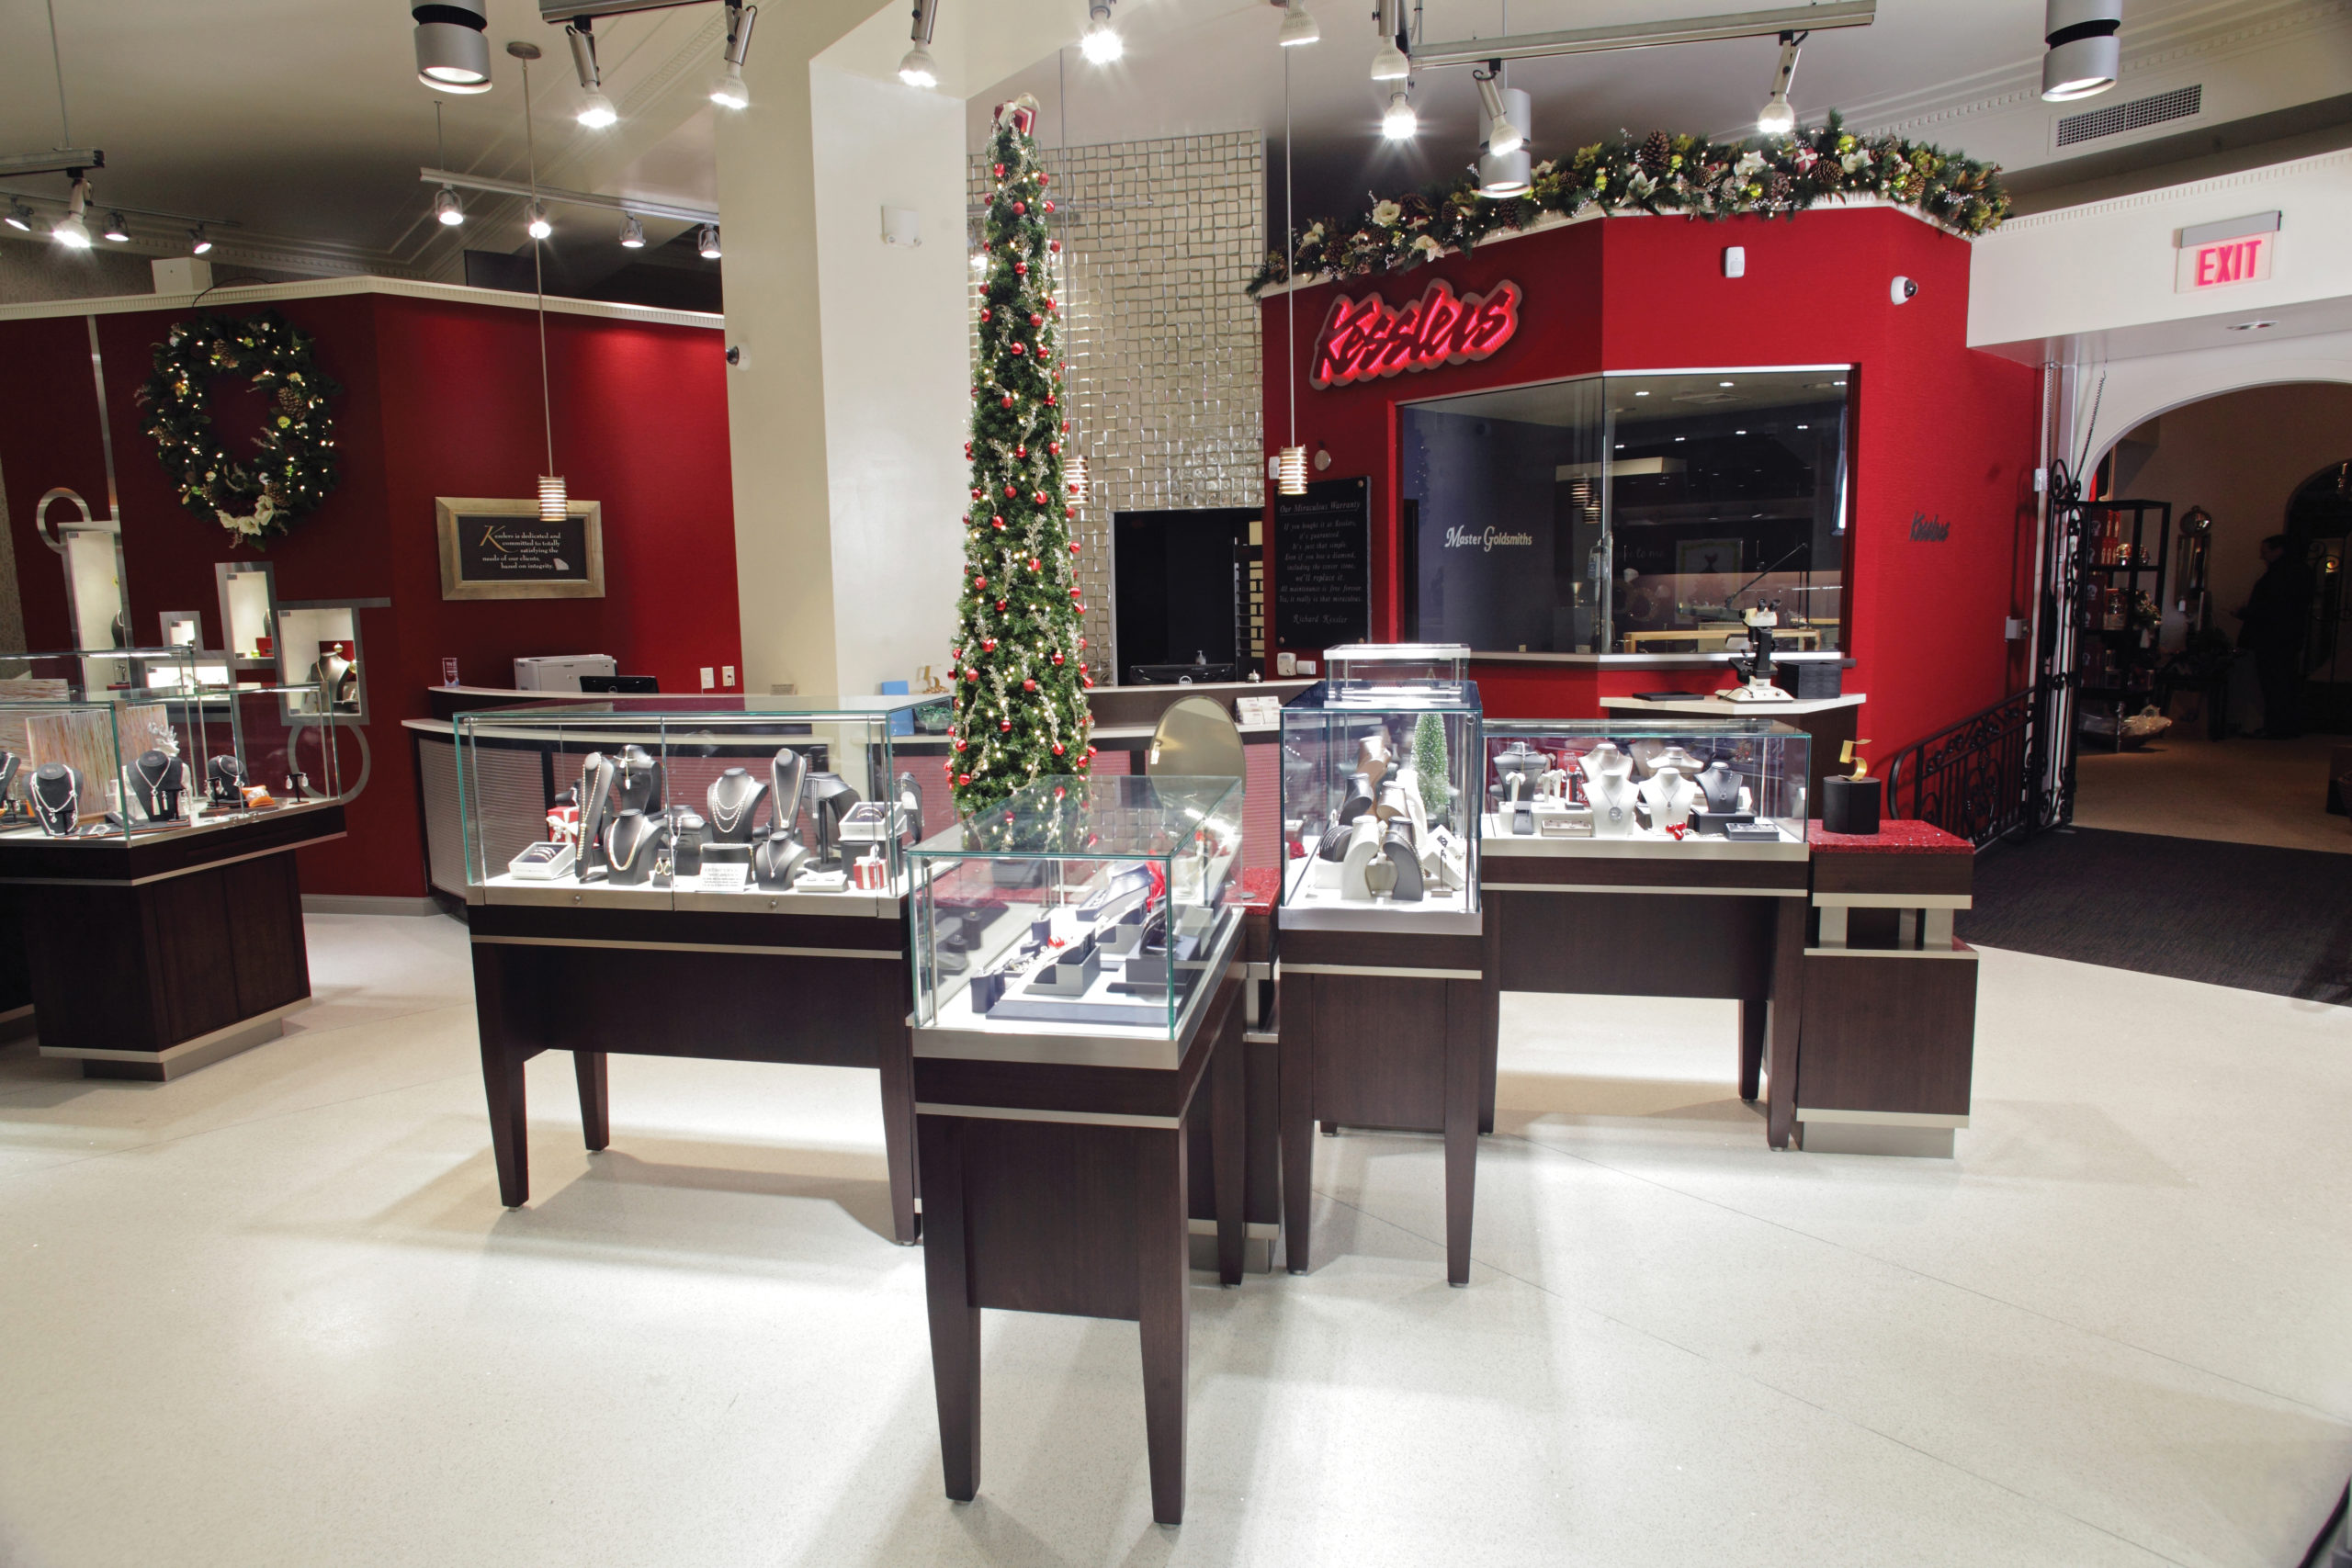 Glass displays cases decorated for the holidays in Kesslers Diamonds